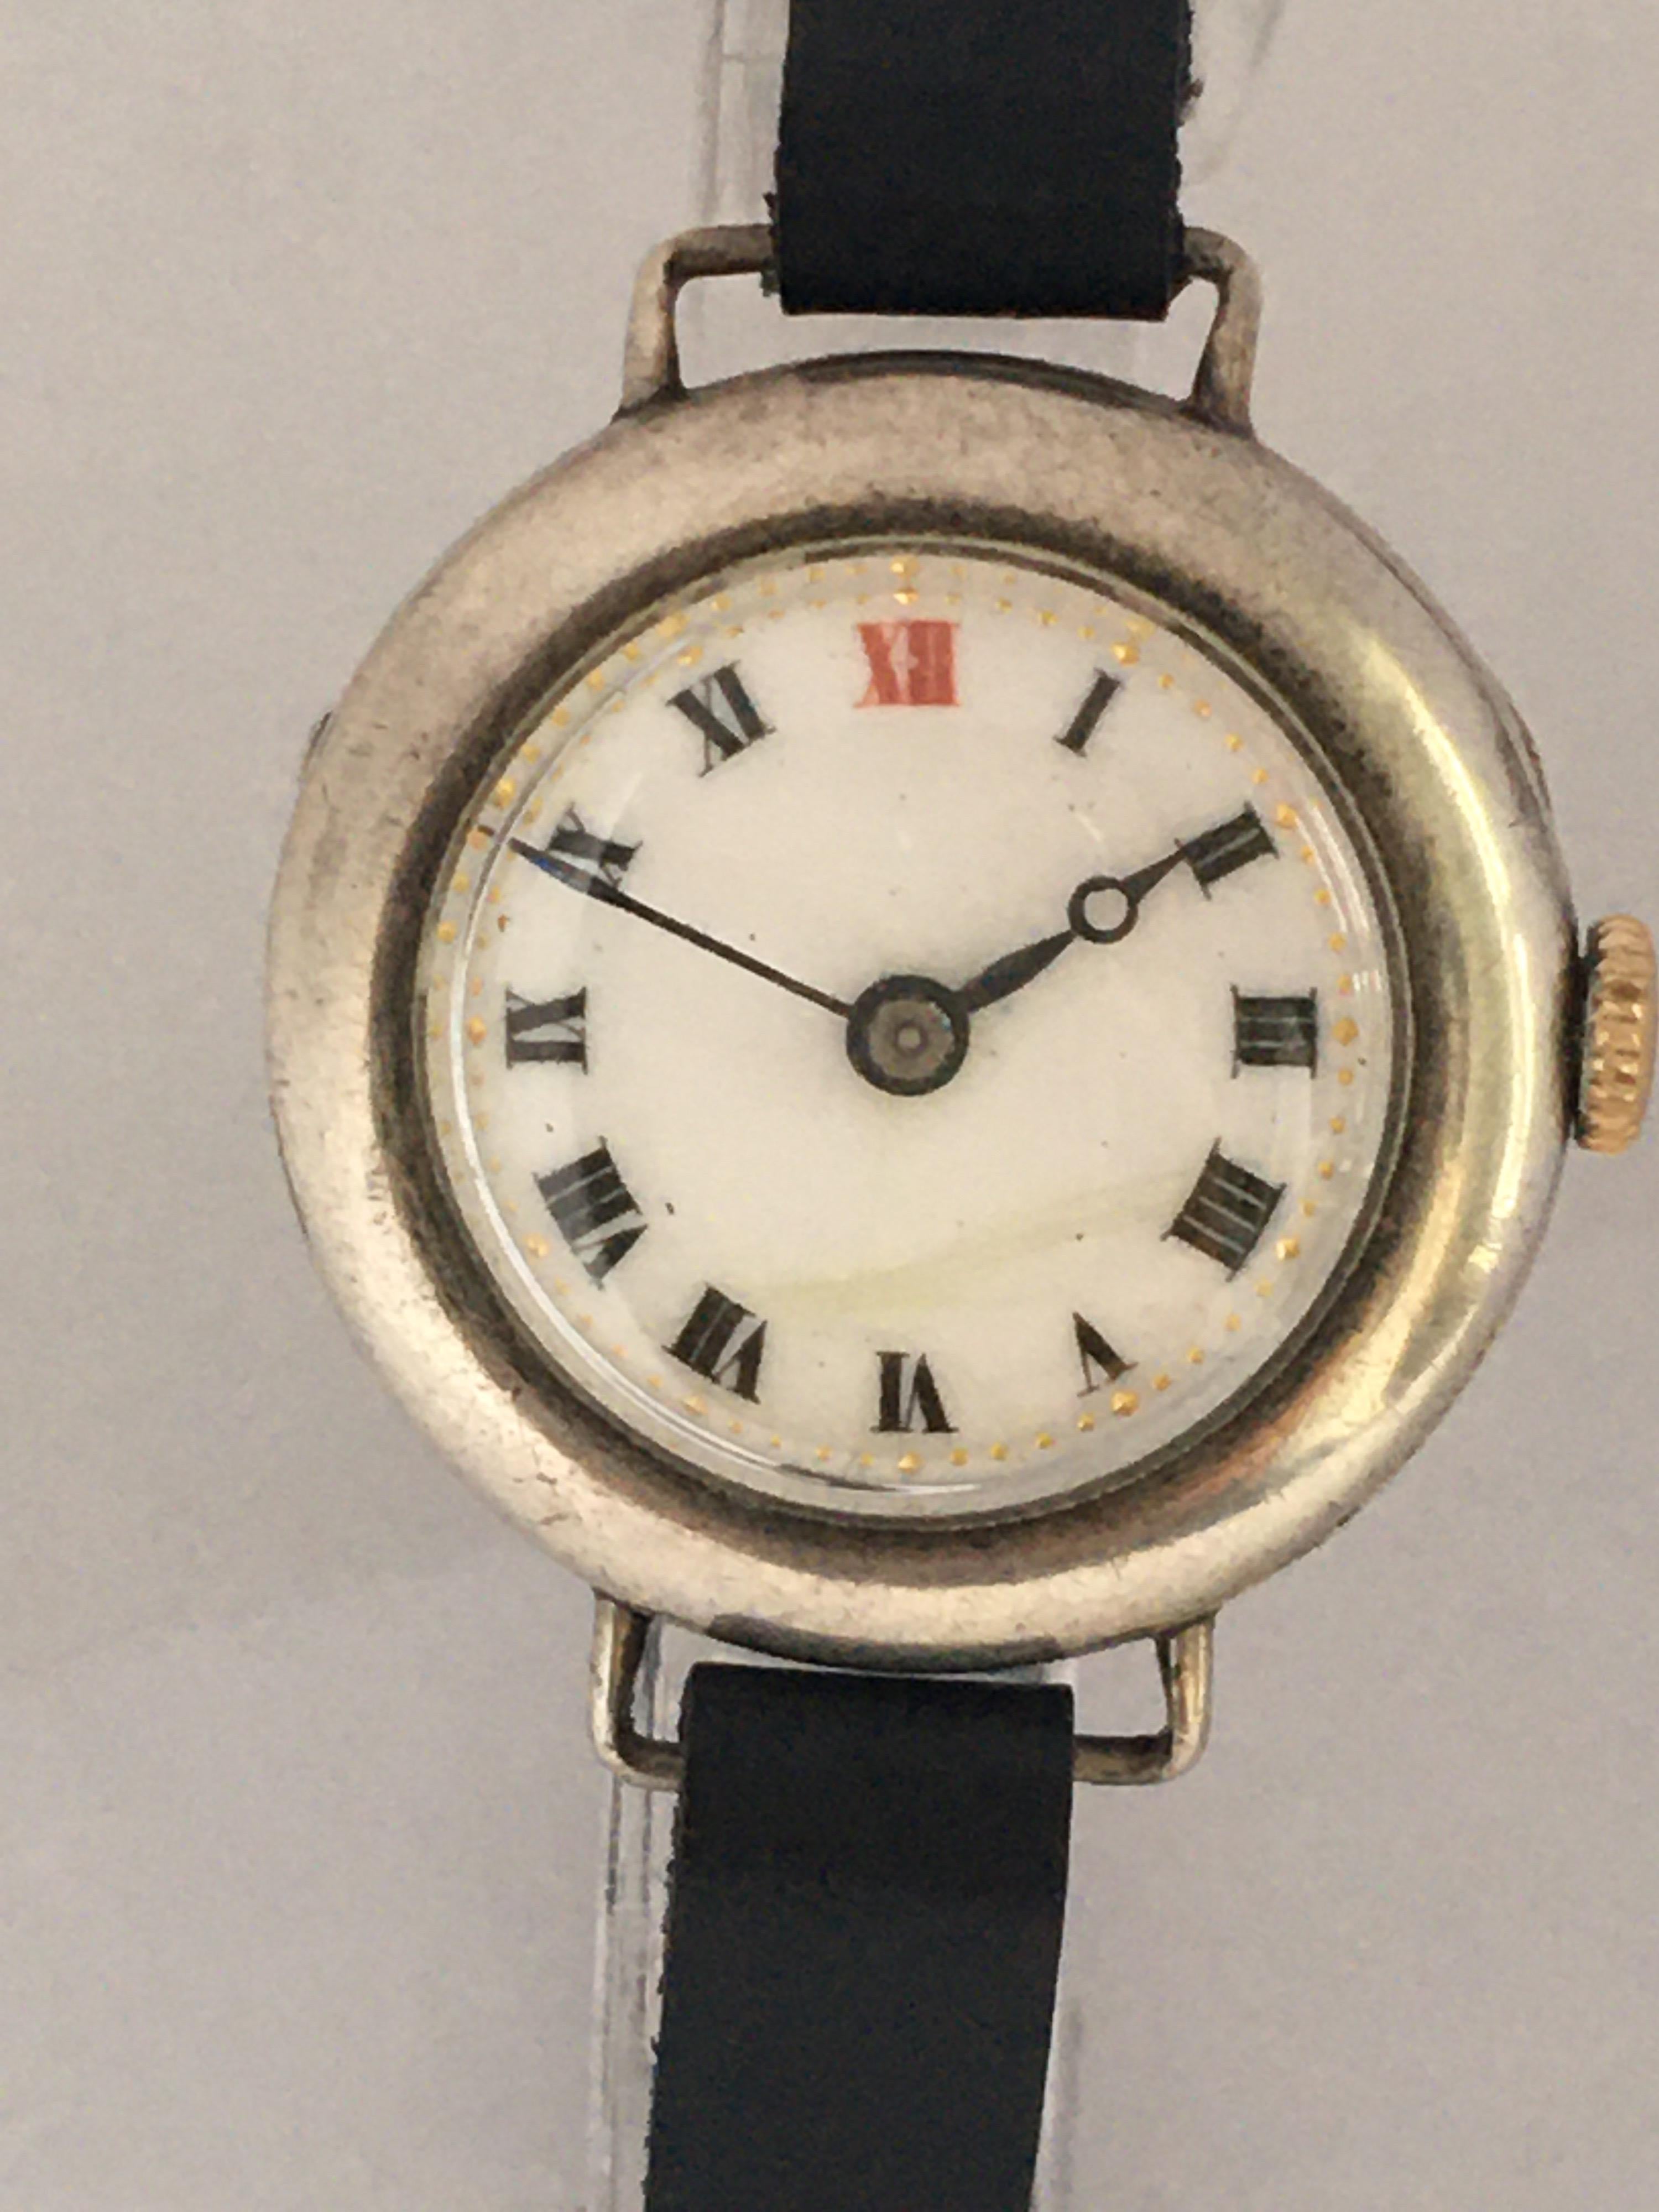 This beautiful pre-owned antique silver trench watch is in good working condition and it is ticking well. It is recently been serviced. Visible signs of ageing and wear with tiny and light dents and scratches on the case as shown. A small crack